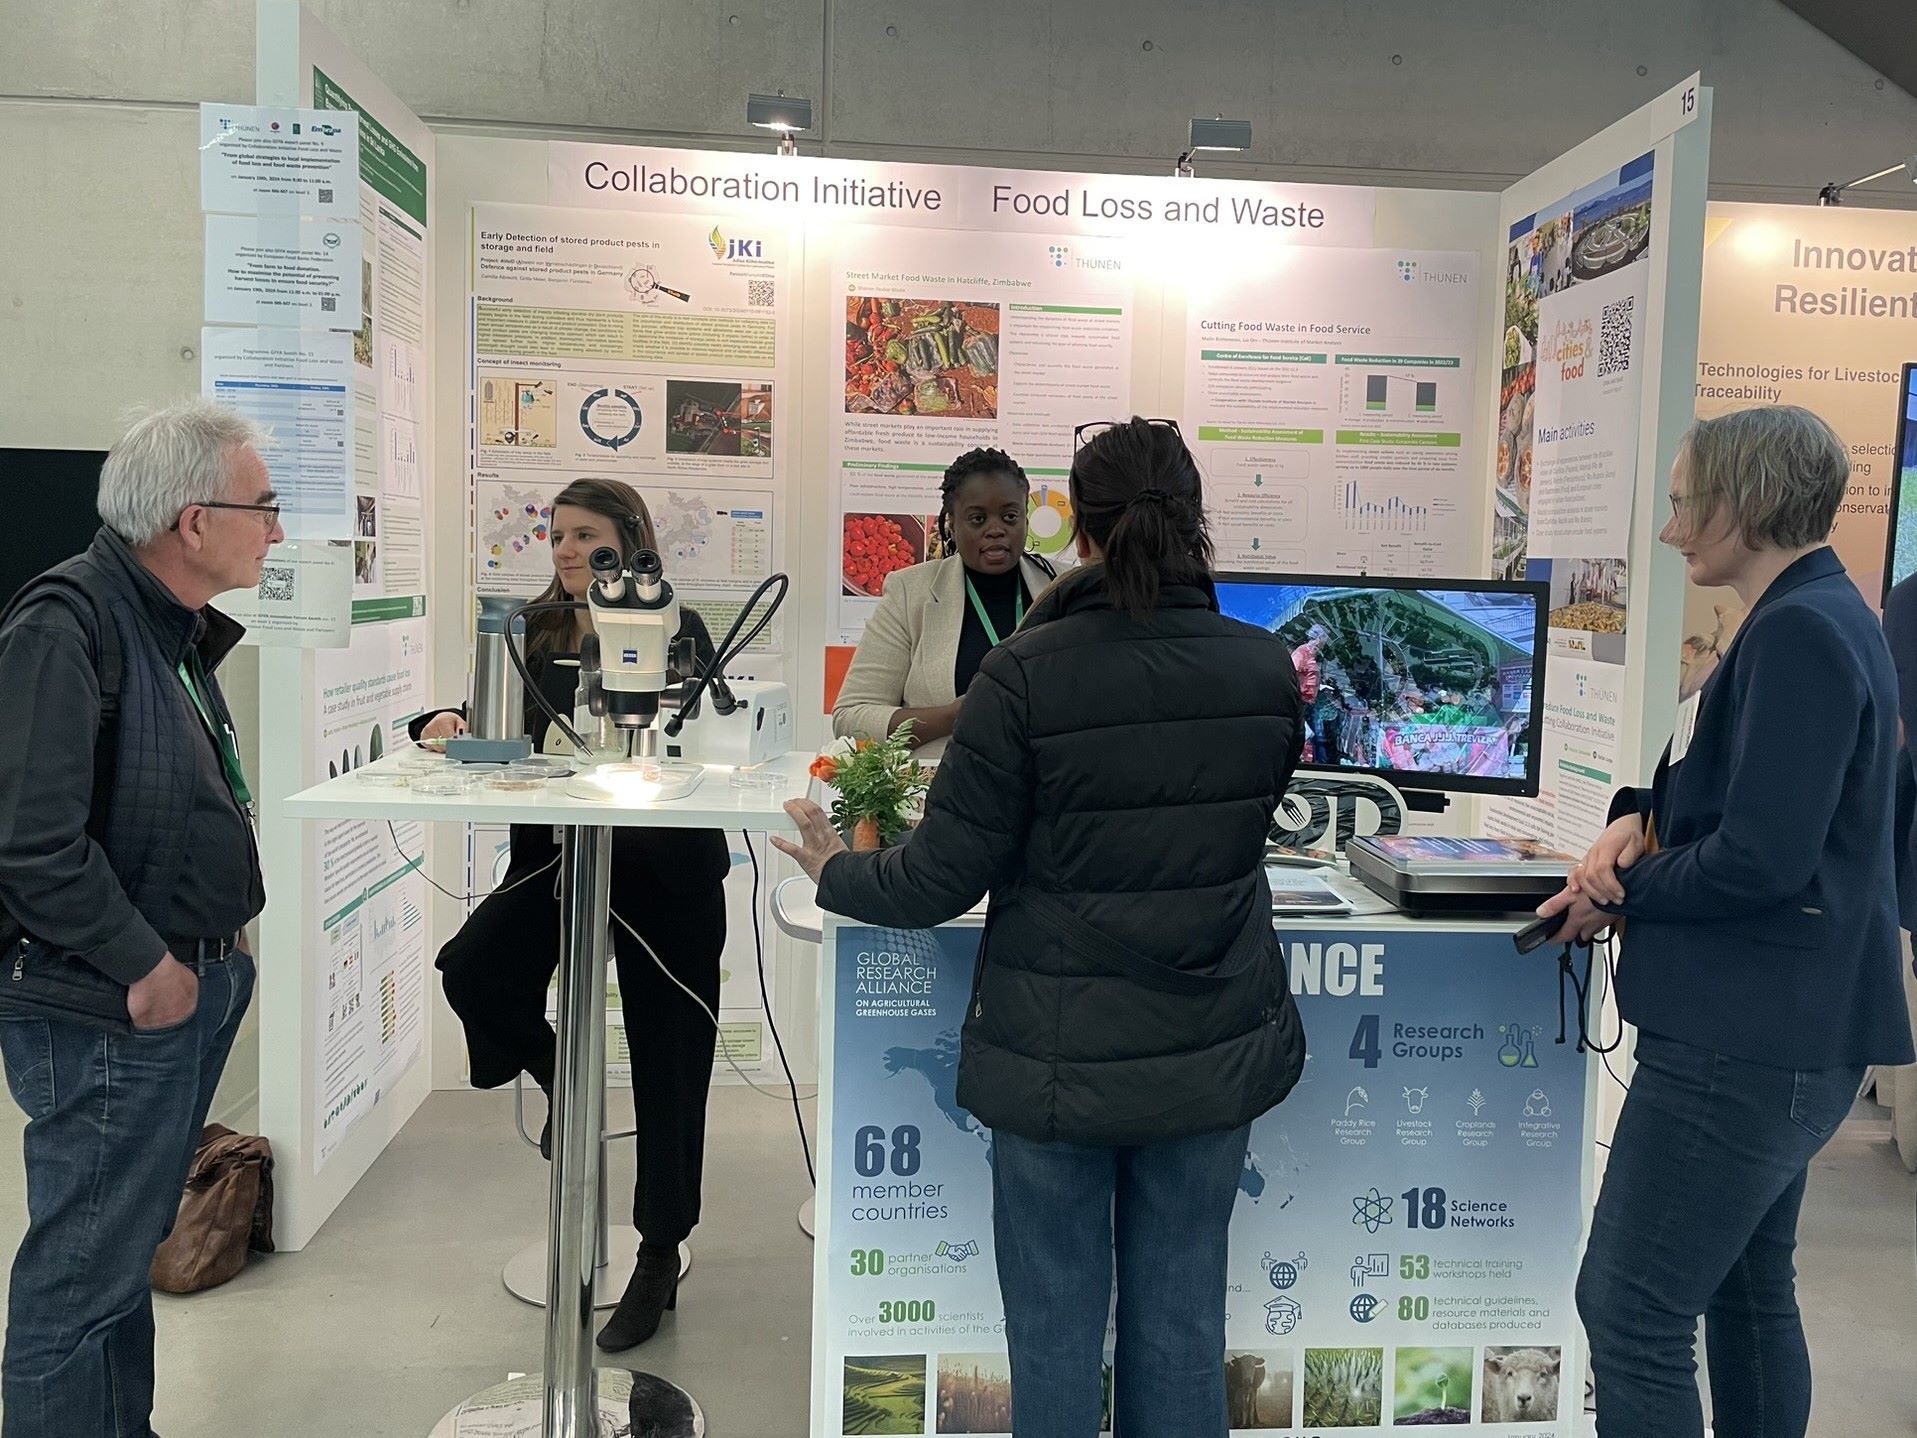 The photo shows Camilla Albrecht (Julius Kühn-Institute) and Sharon Mada (Thünen Institute) explaining visitors their research results at the GFFA stall.